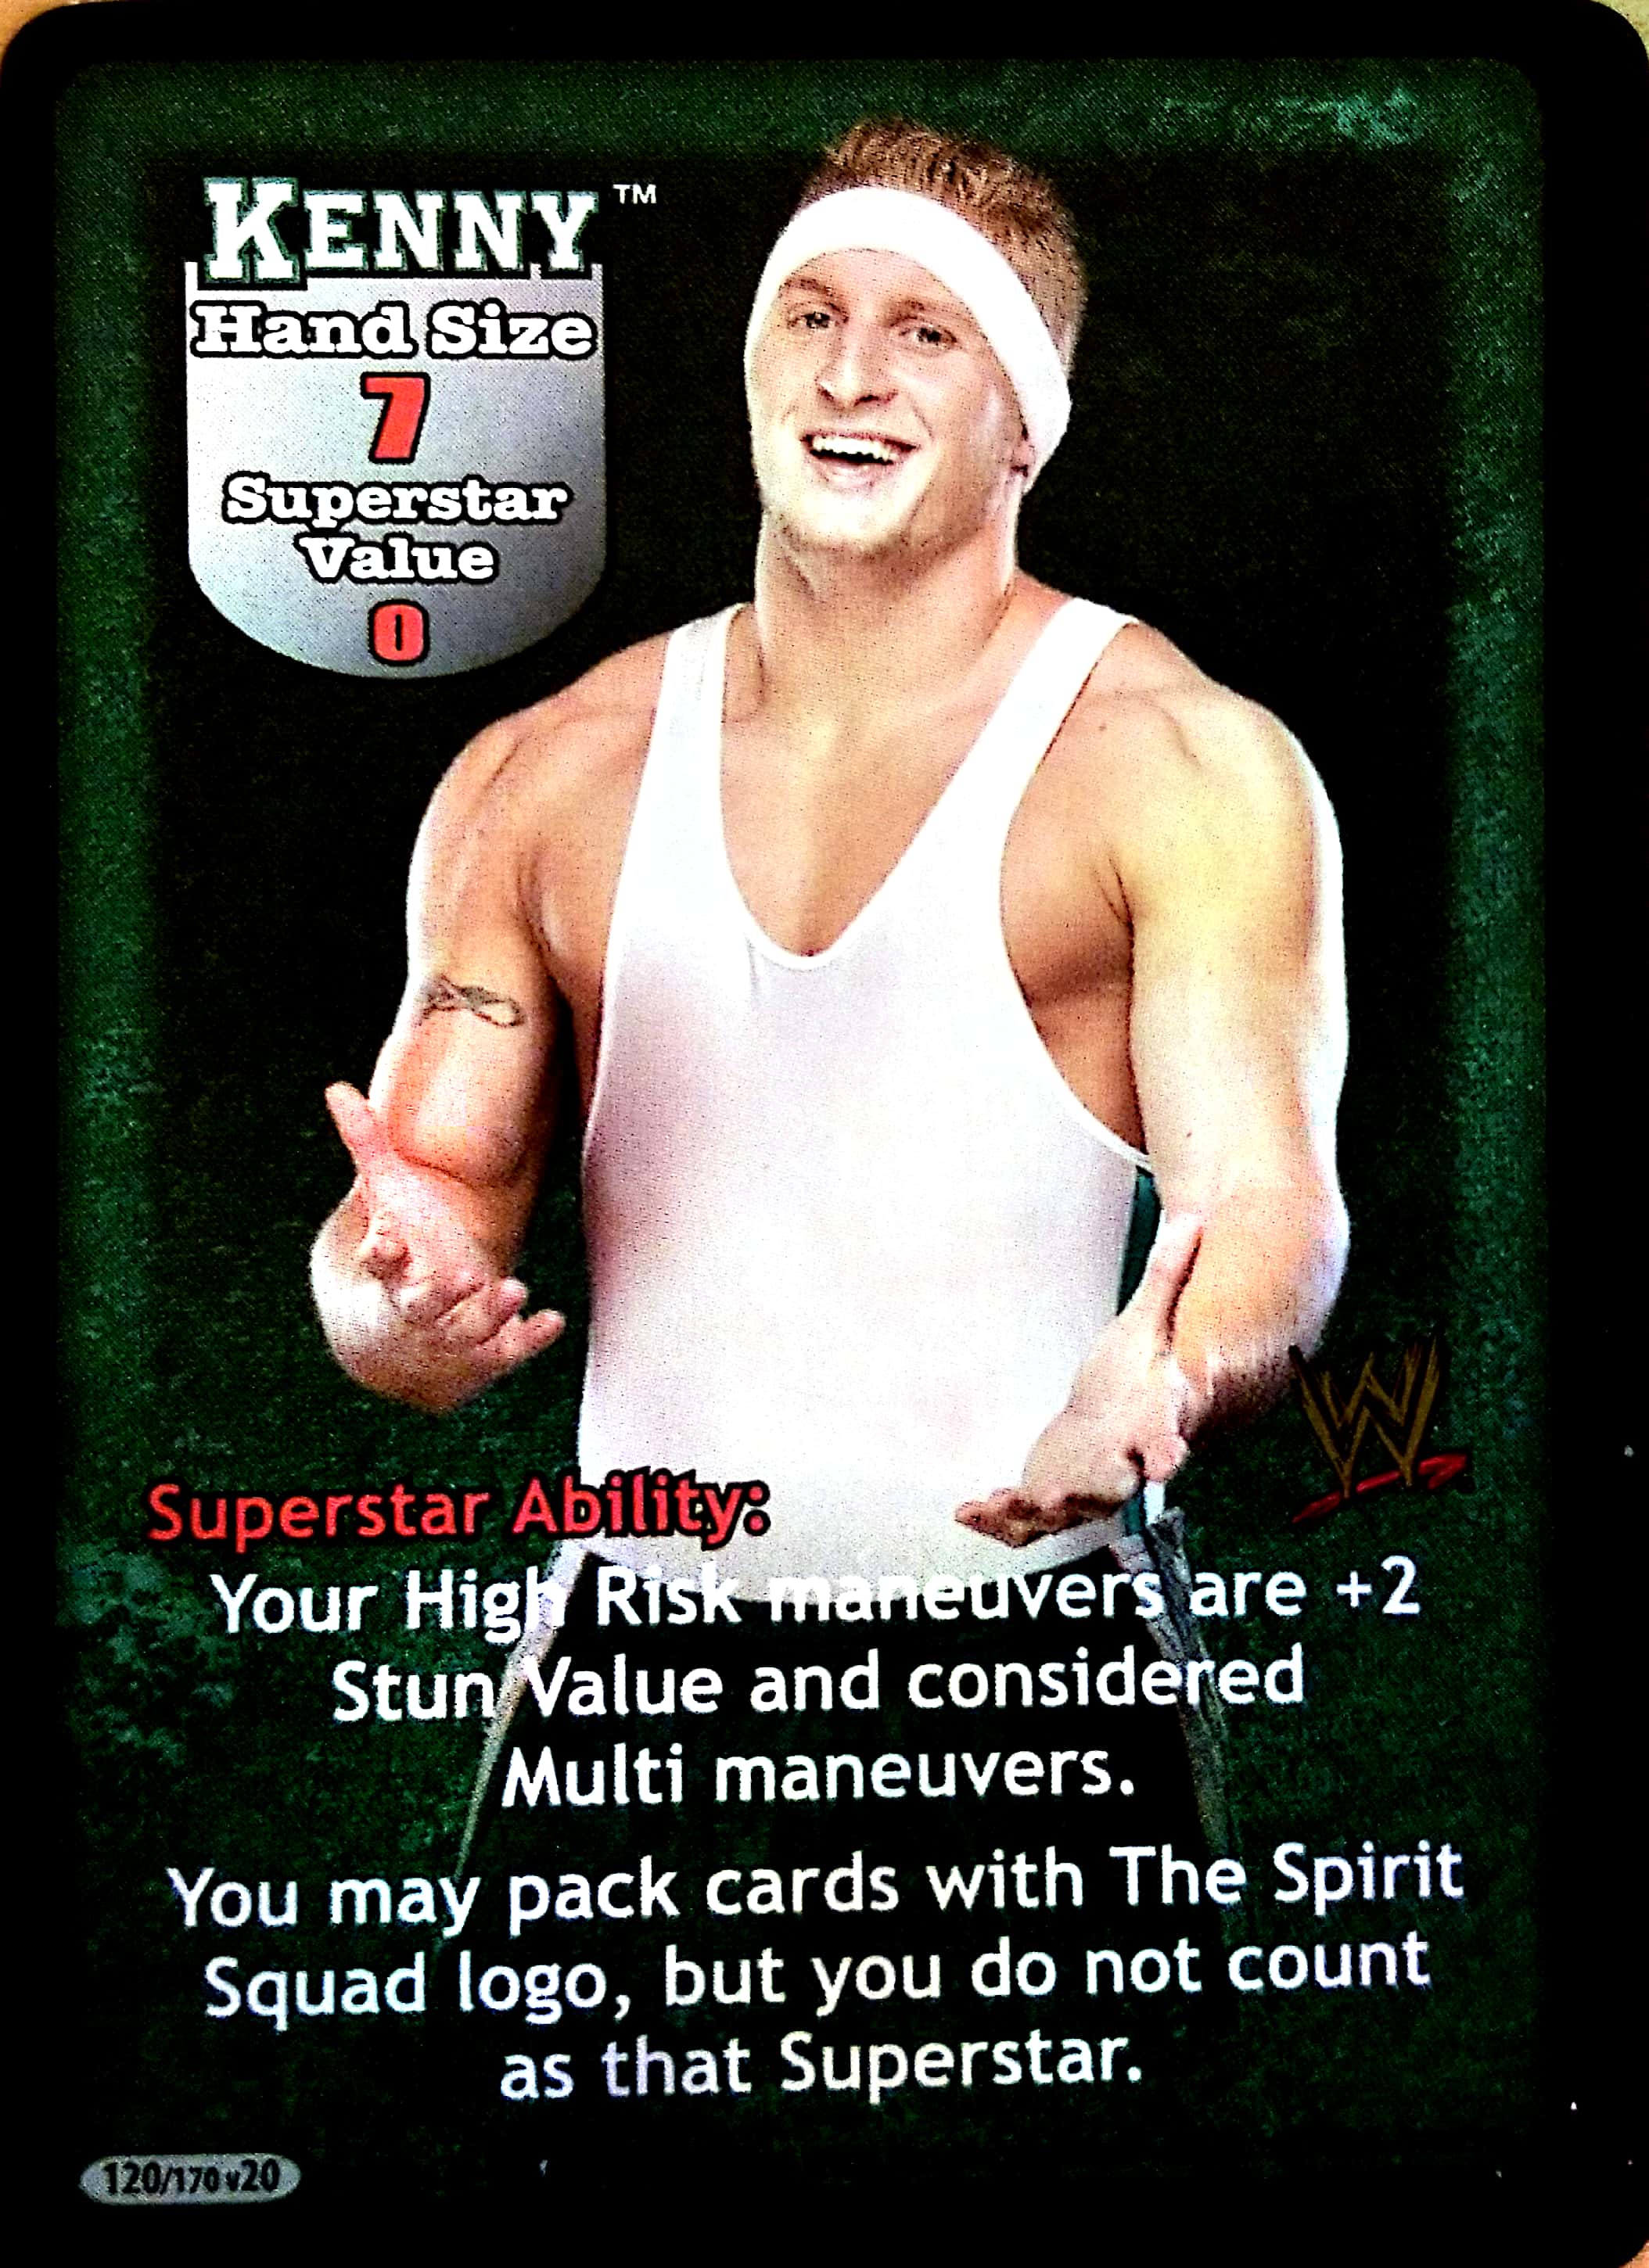 Played The Spirit Squad Superstar Card for Spirit Squad Raw Deal WWE: Mikey